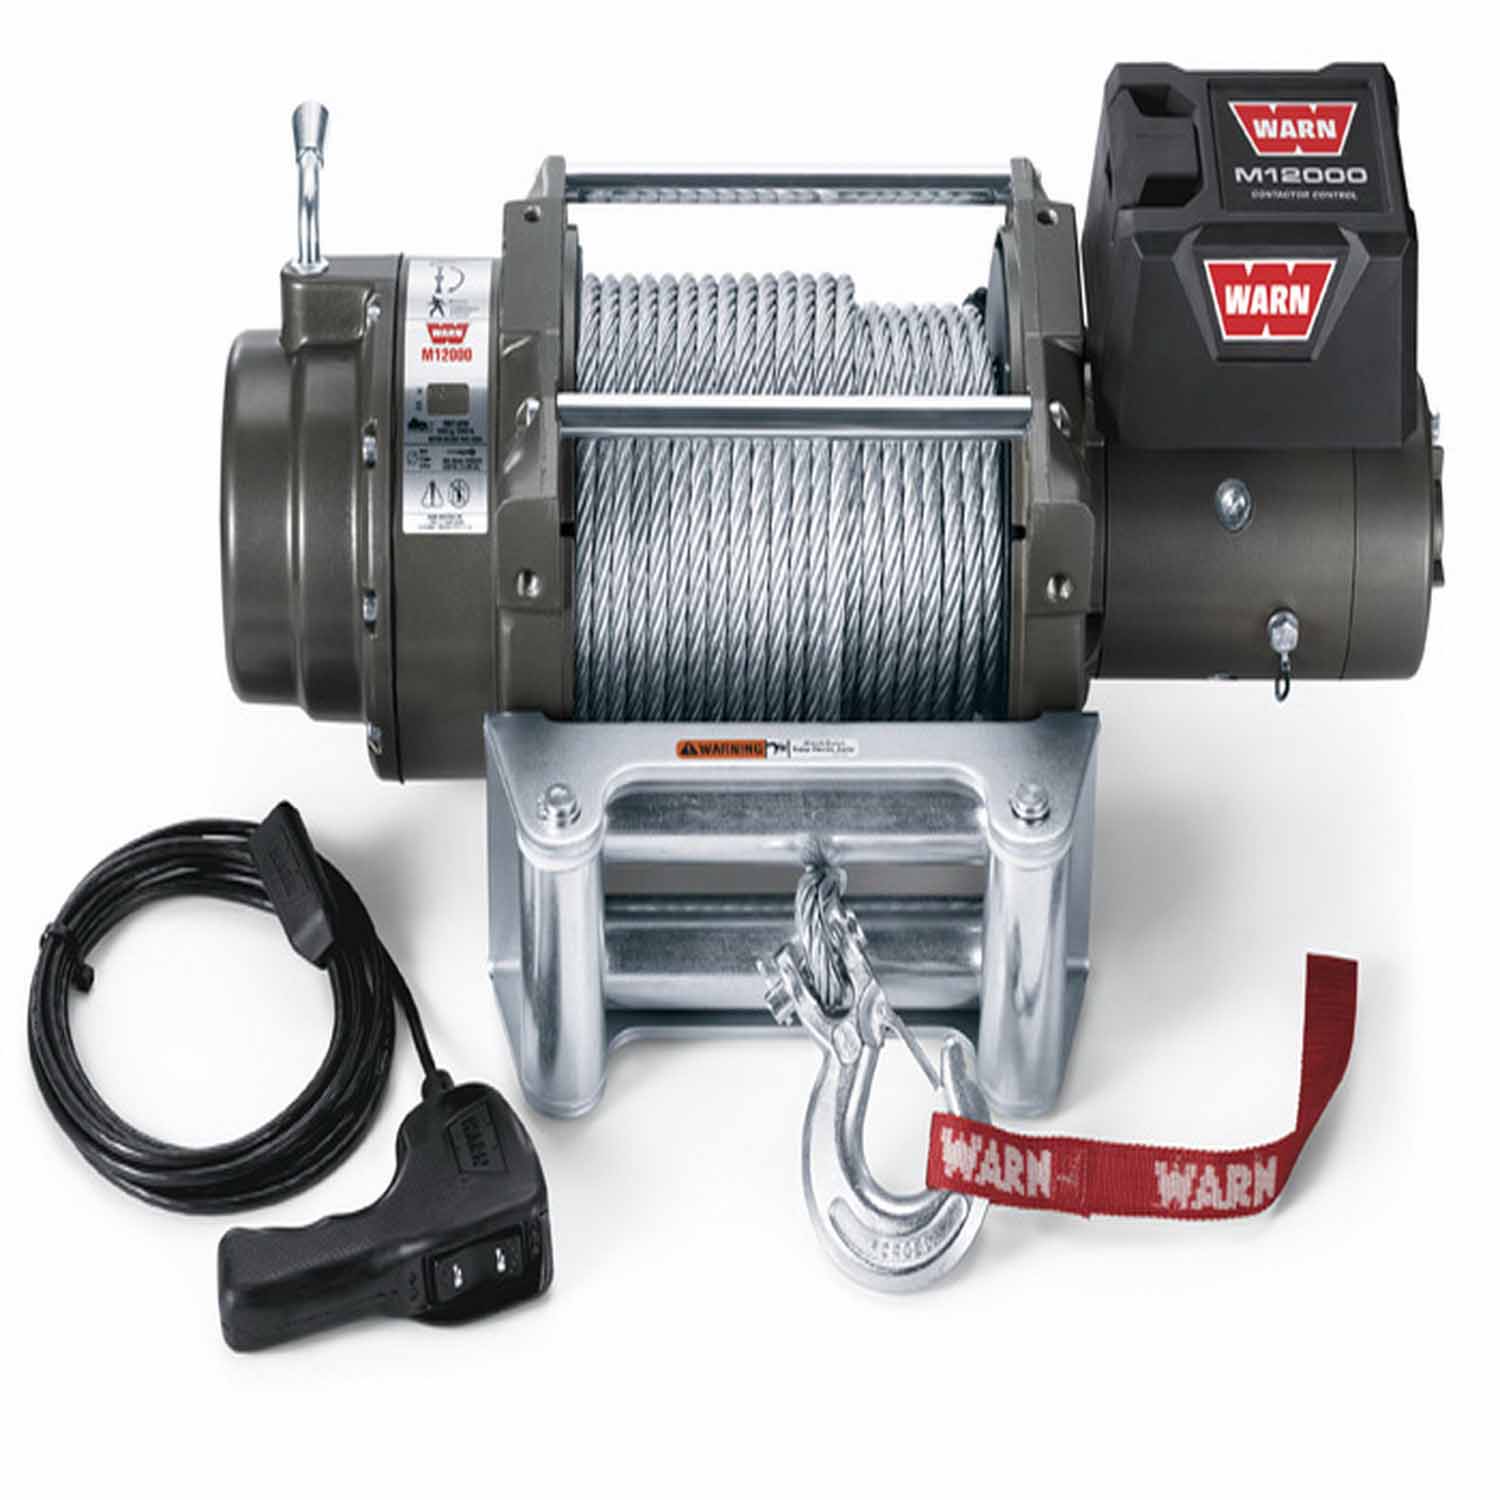 M12000 Winch w/Roller & 125' Cable - 17801